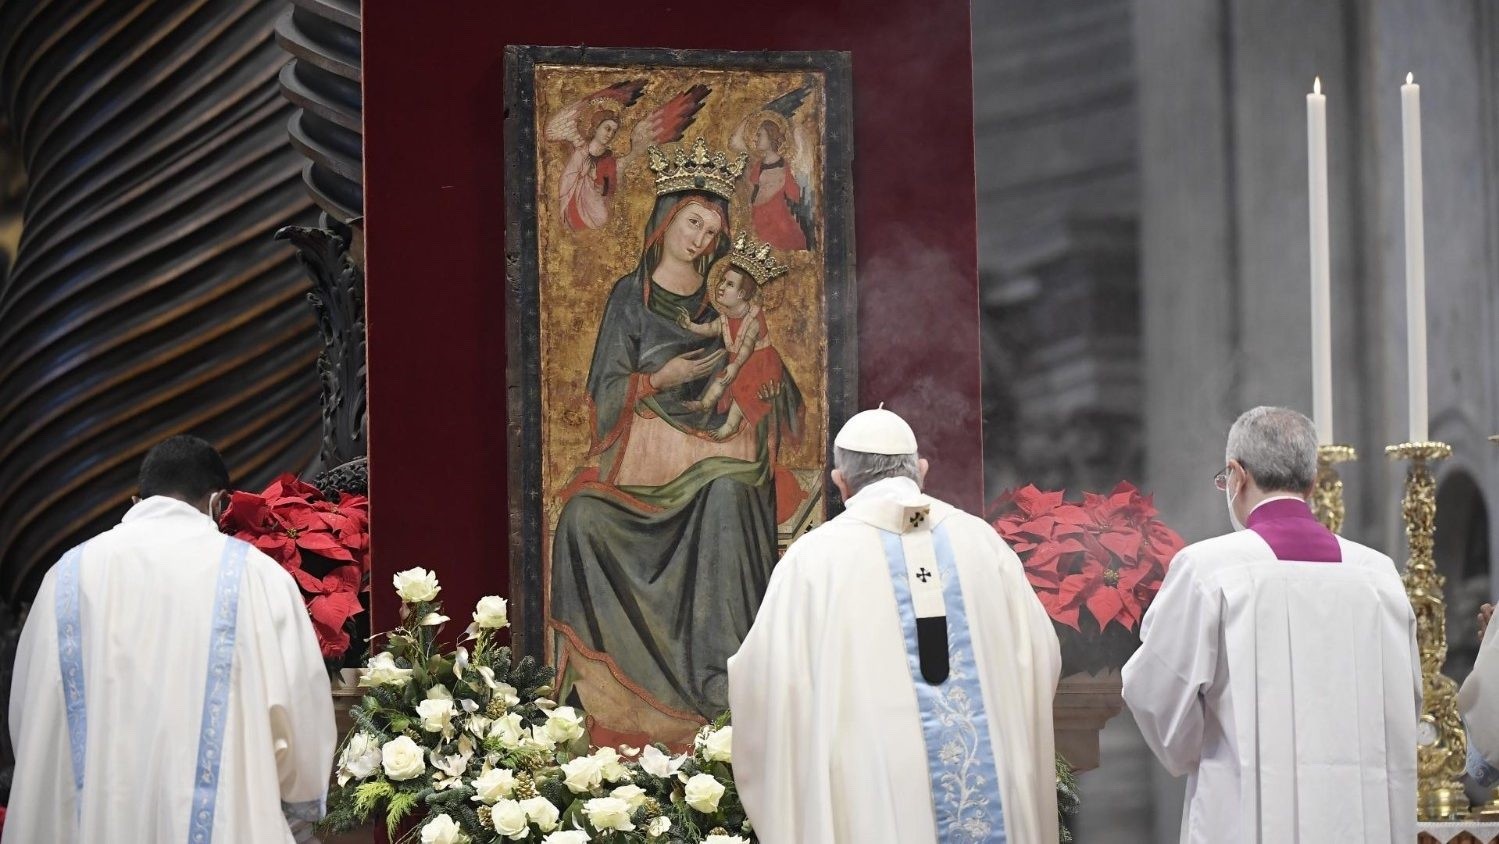 Pope Francis presiding over Mass on the Solemnity of the Blessed Virgin Mary